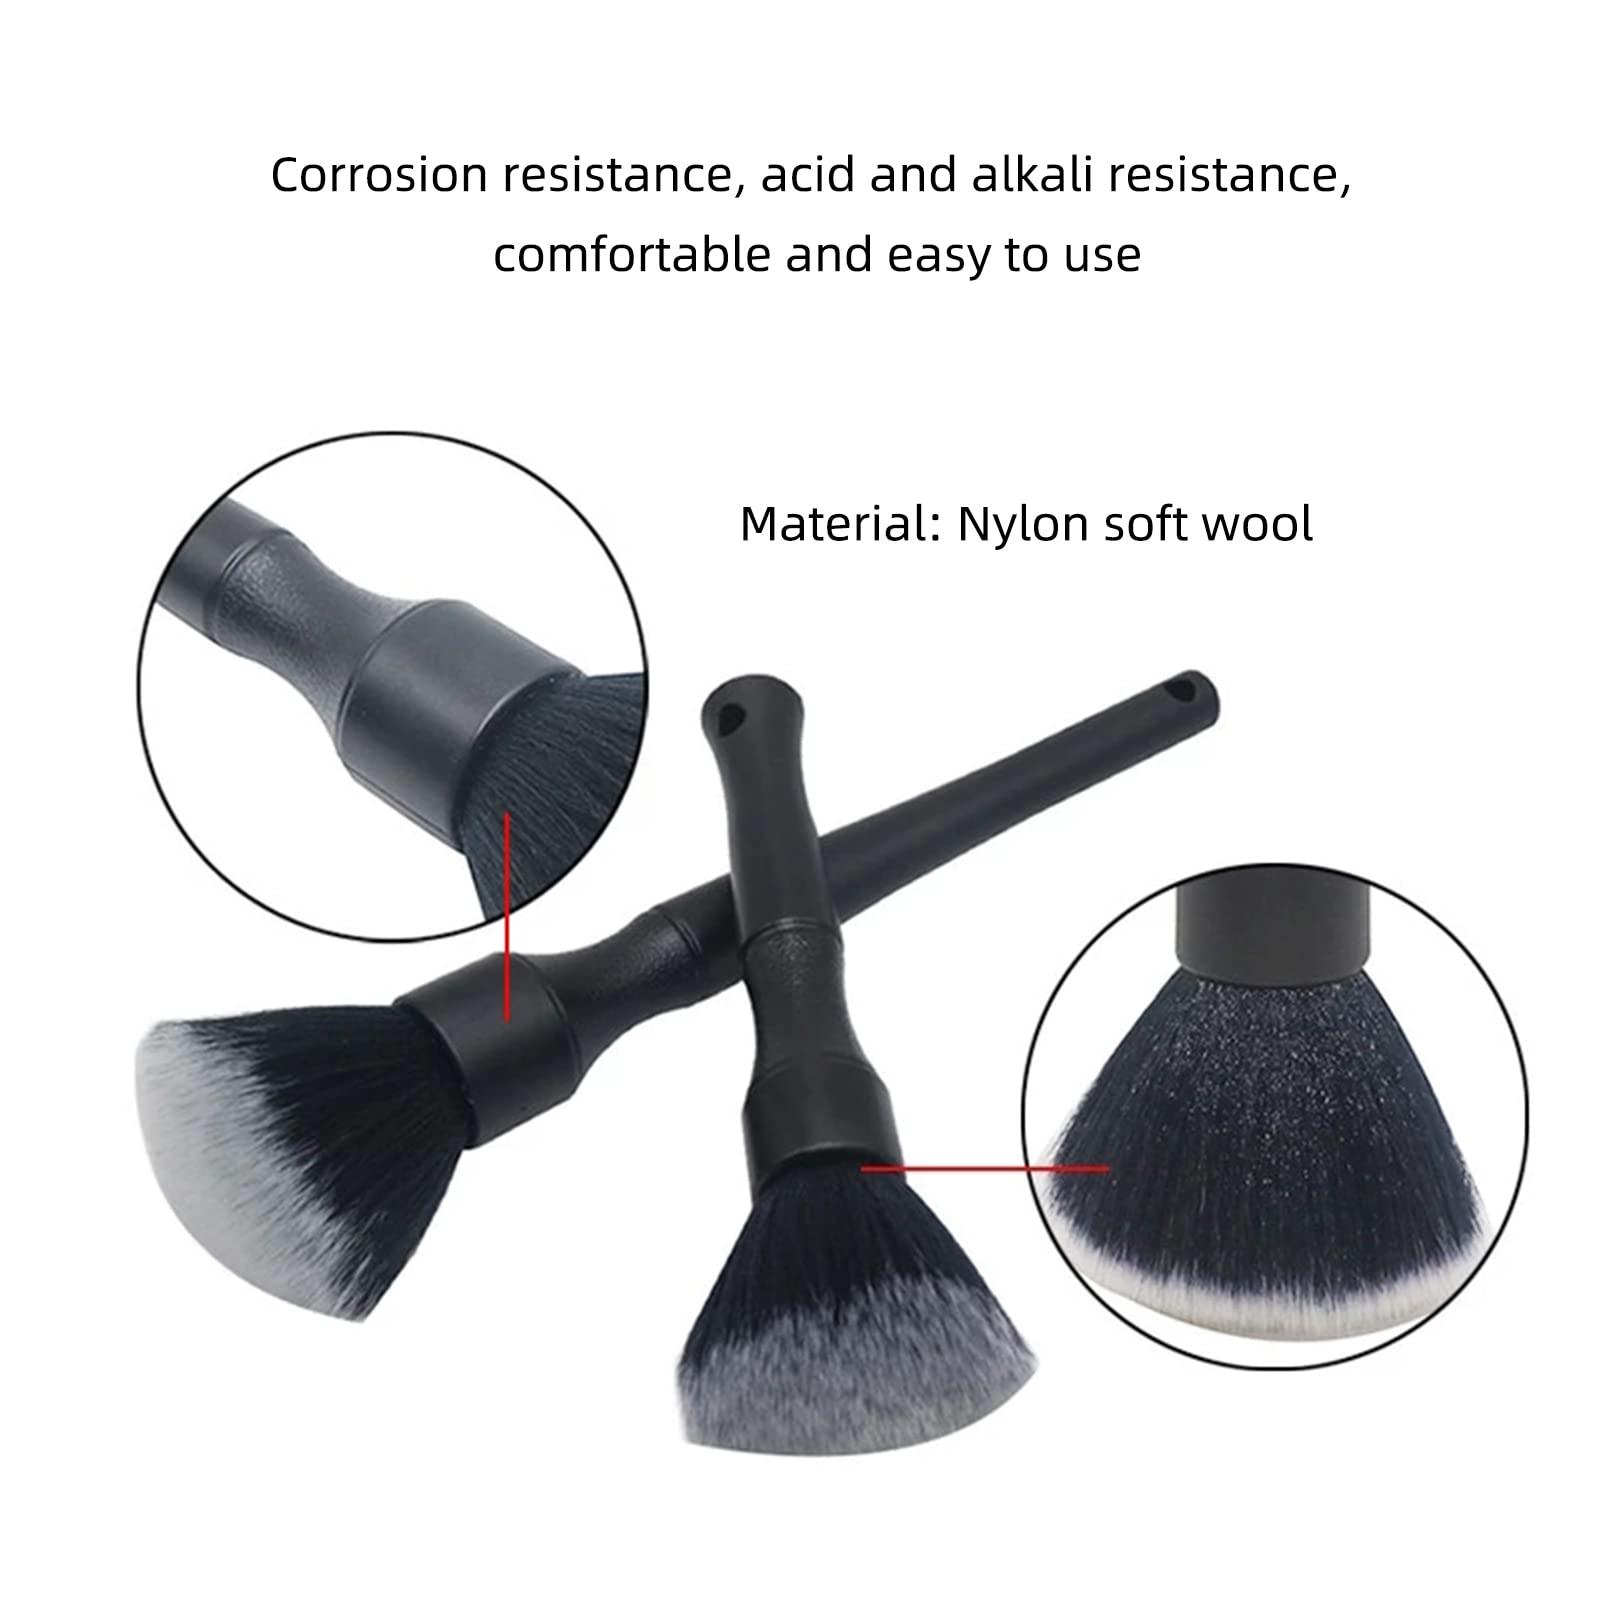 ALI2 Detailing Brush Set,Soft Comfortable Grip for Car Interior and Exterior Detailing Cleaning,Black 4